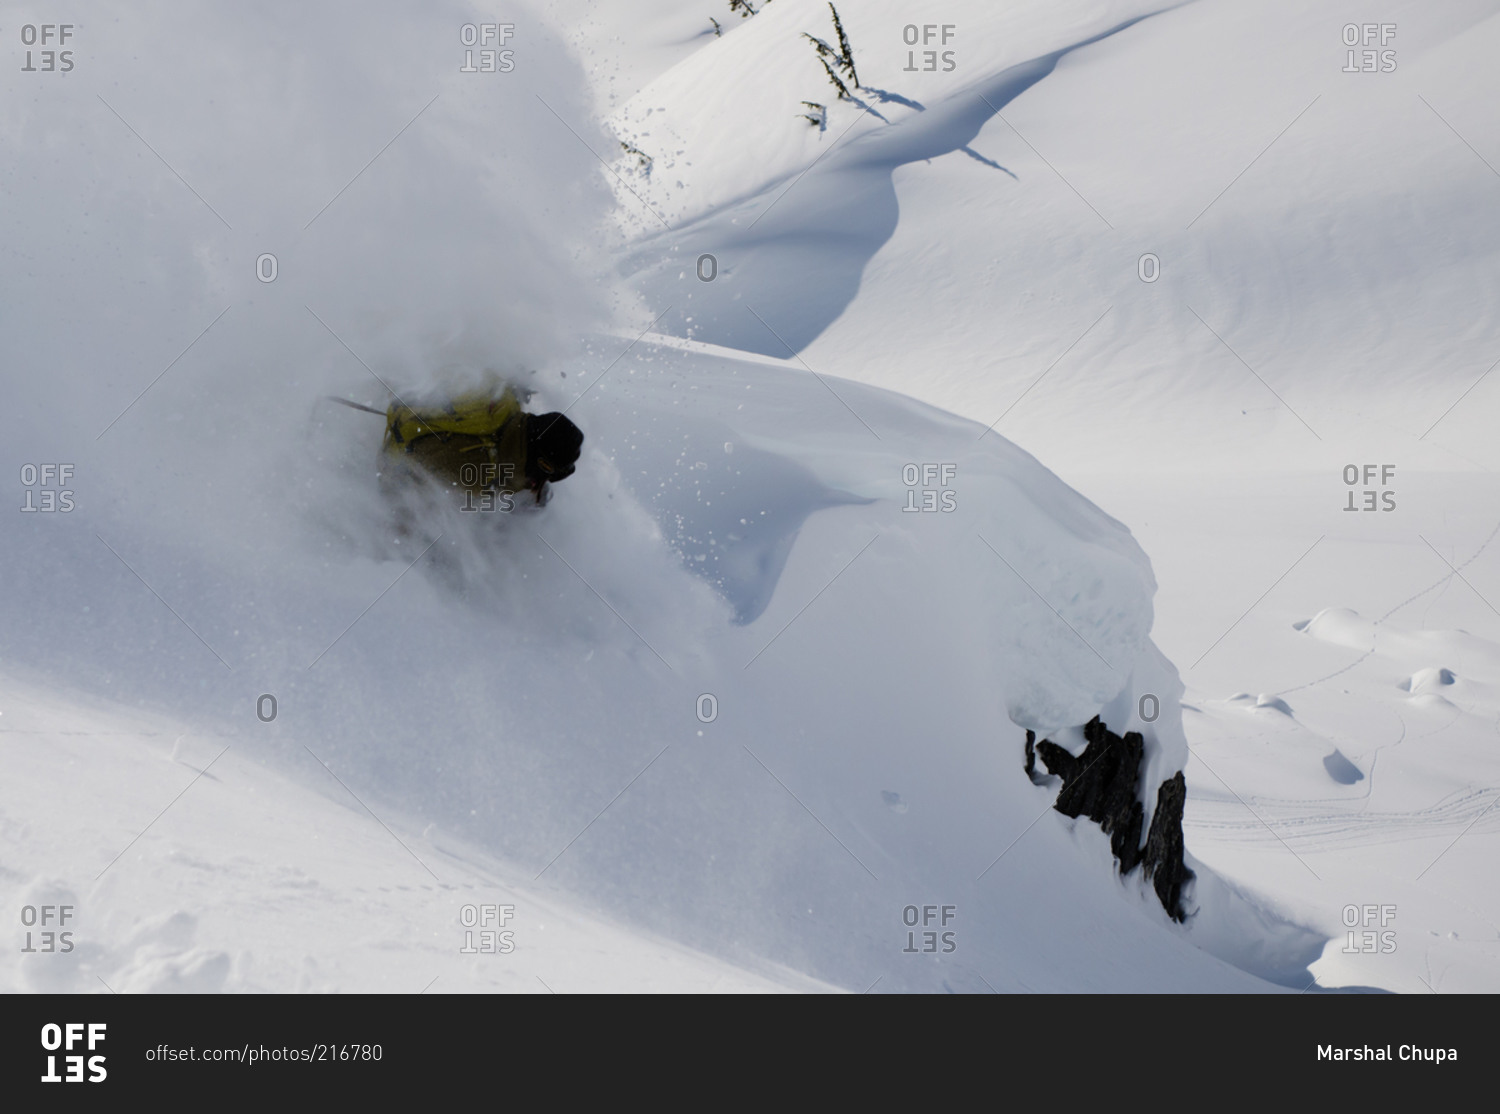 Snowboarder tearing up deep snow in Shames Mountains, BC, Canada